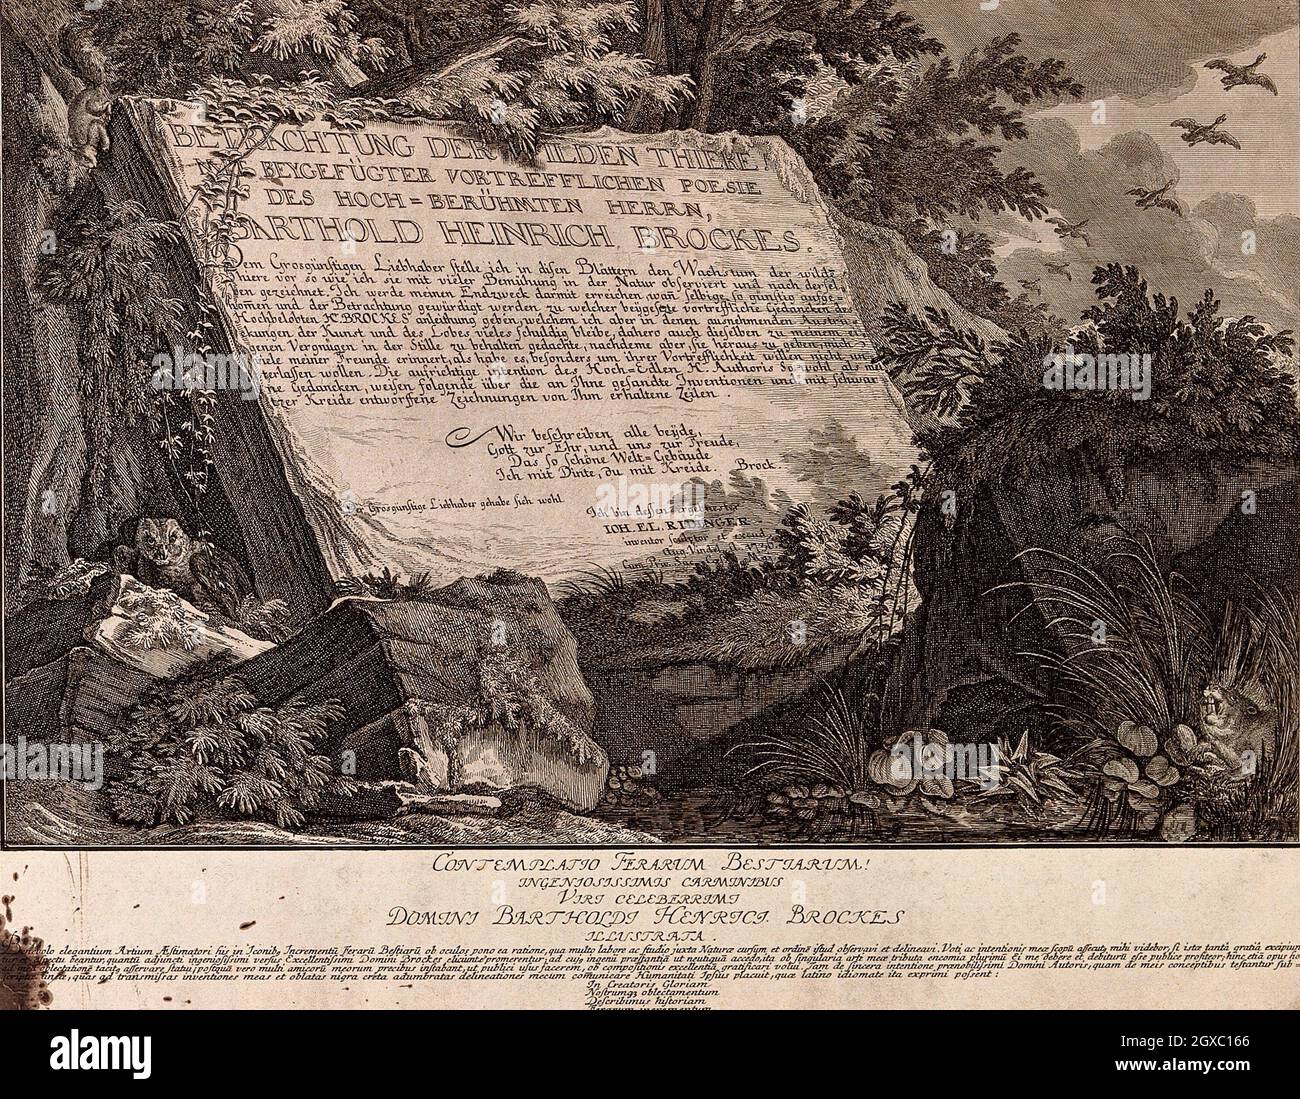 An inscribed stoneplate embedded in the ground in a forest surrounded by animals and plants. Etching by J.E. Ridinger. - Contributors Ridinger, Stock Photo